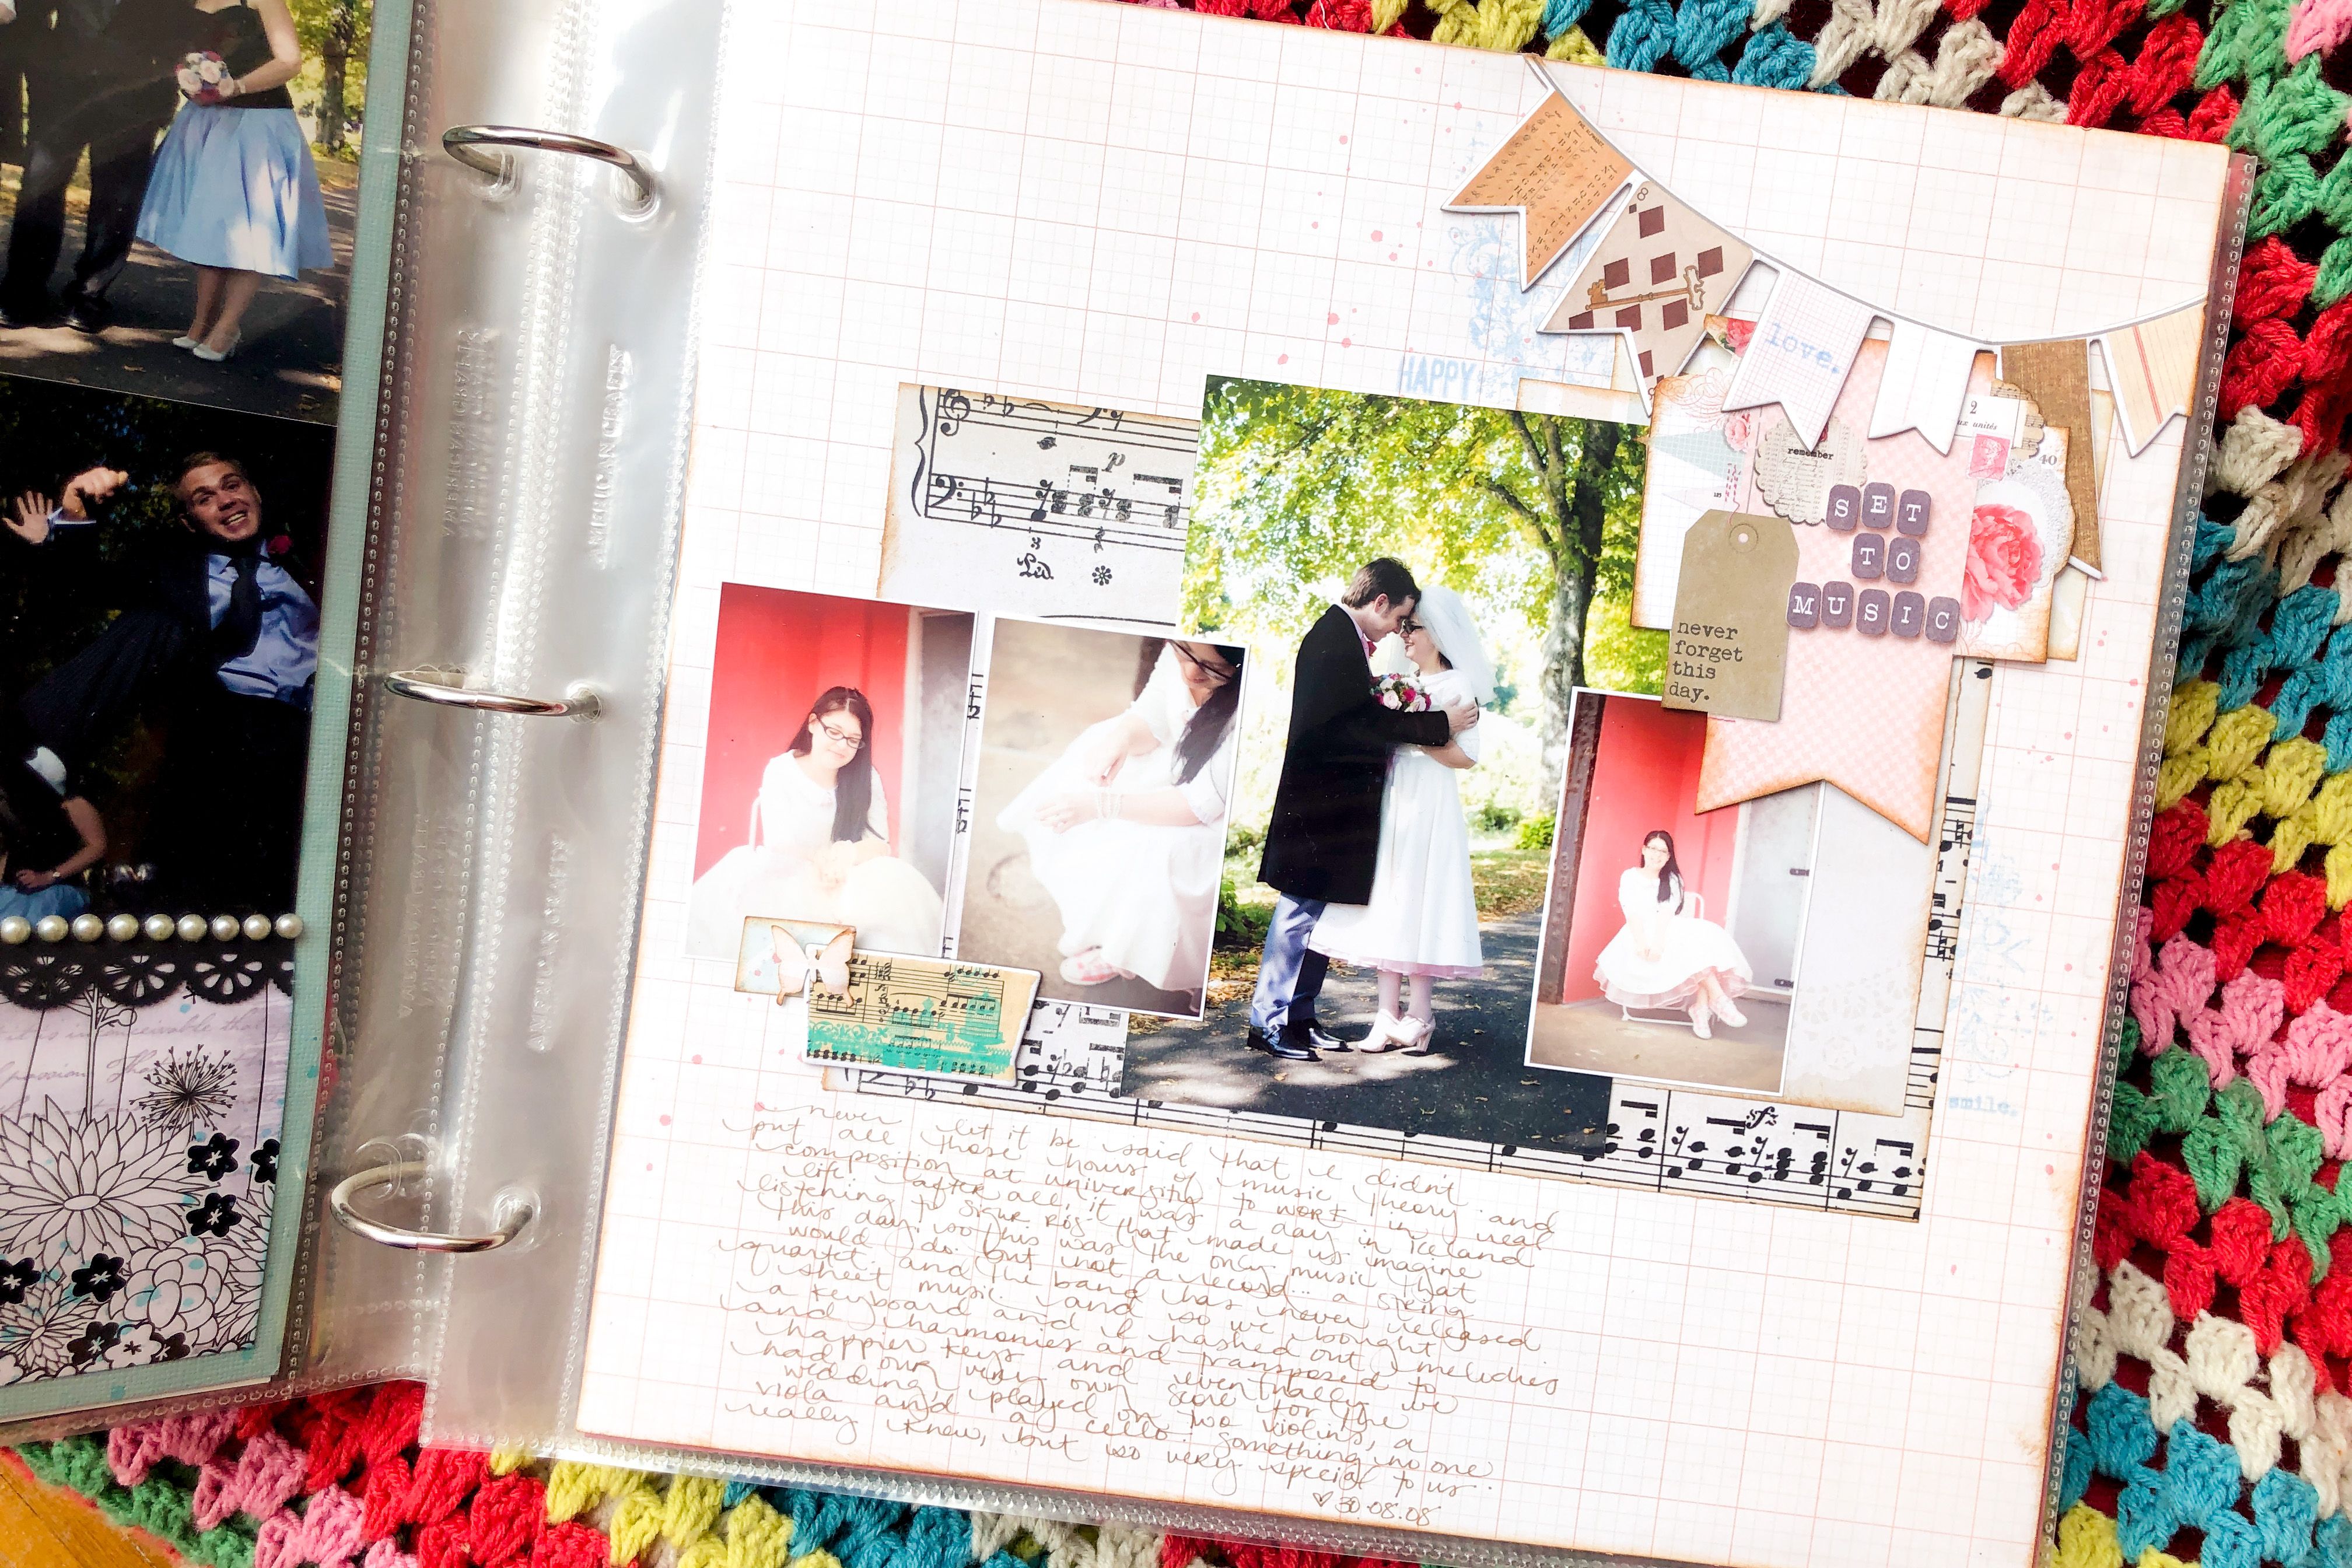 Best scrapbook ideas for beginners – tips from the experts